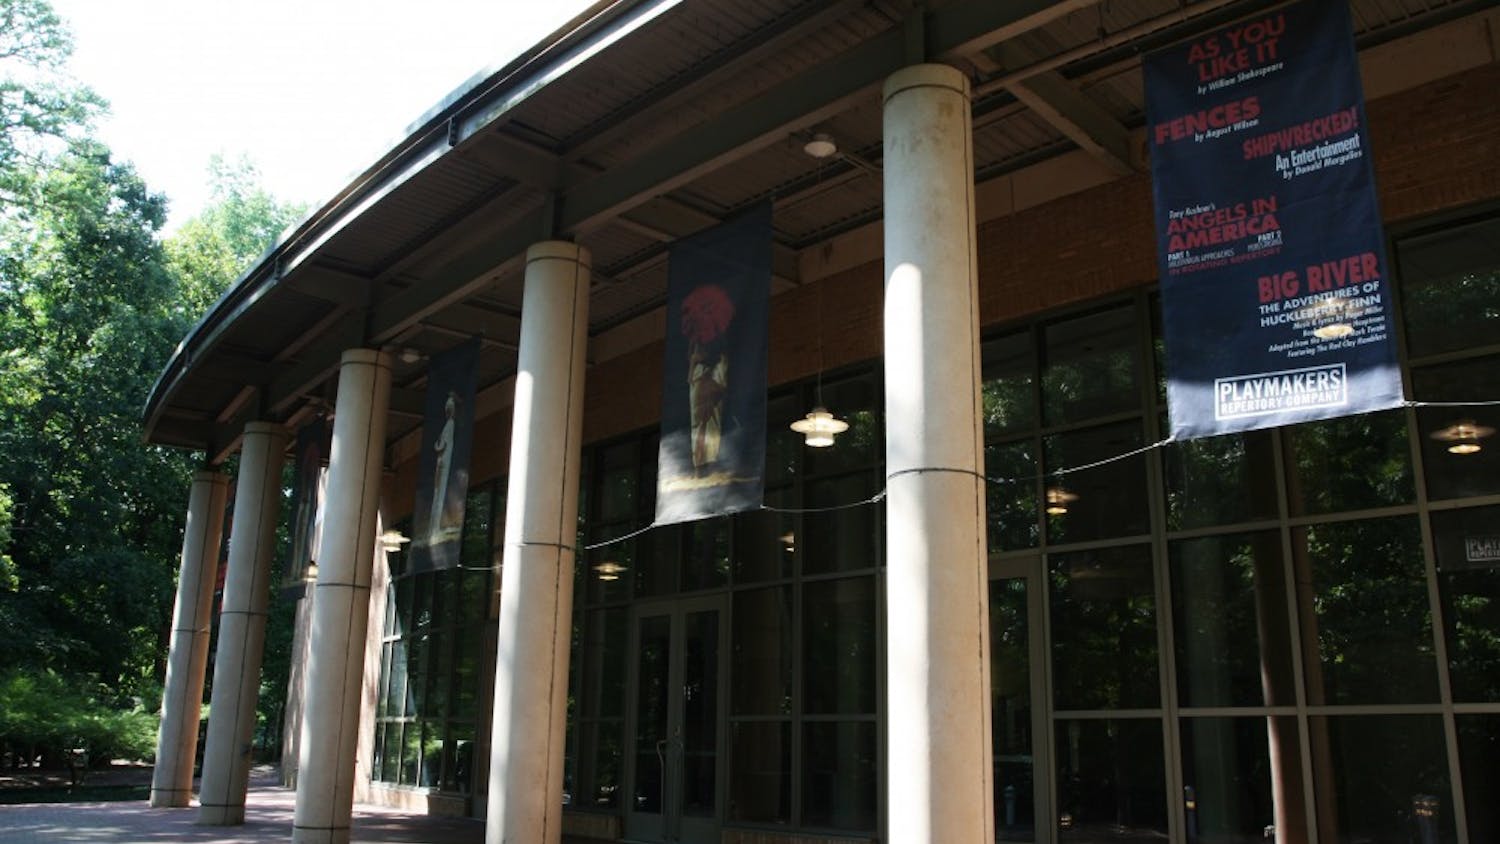 Banners promoting the fall 2010 PlayMakers Repertory Company’s season, which begins Sept. 8, hang outside the Center for Dramatic Art.
